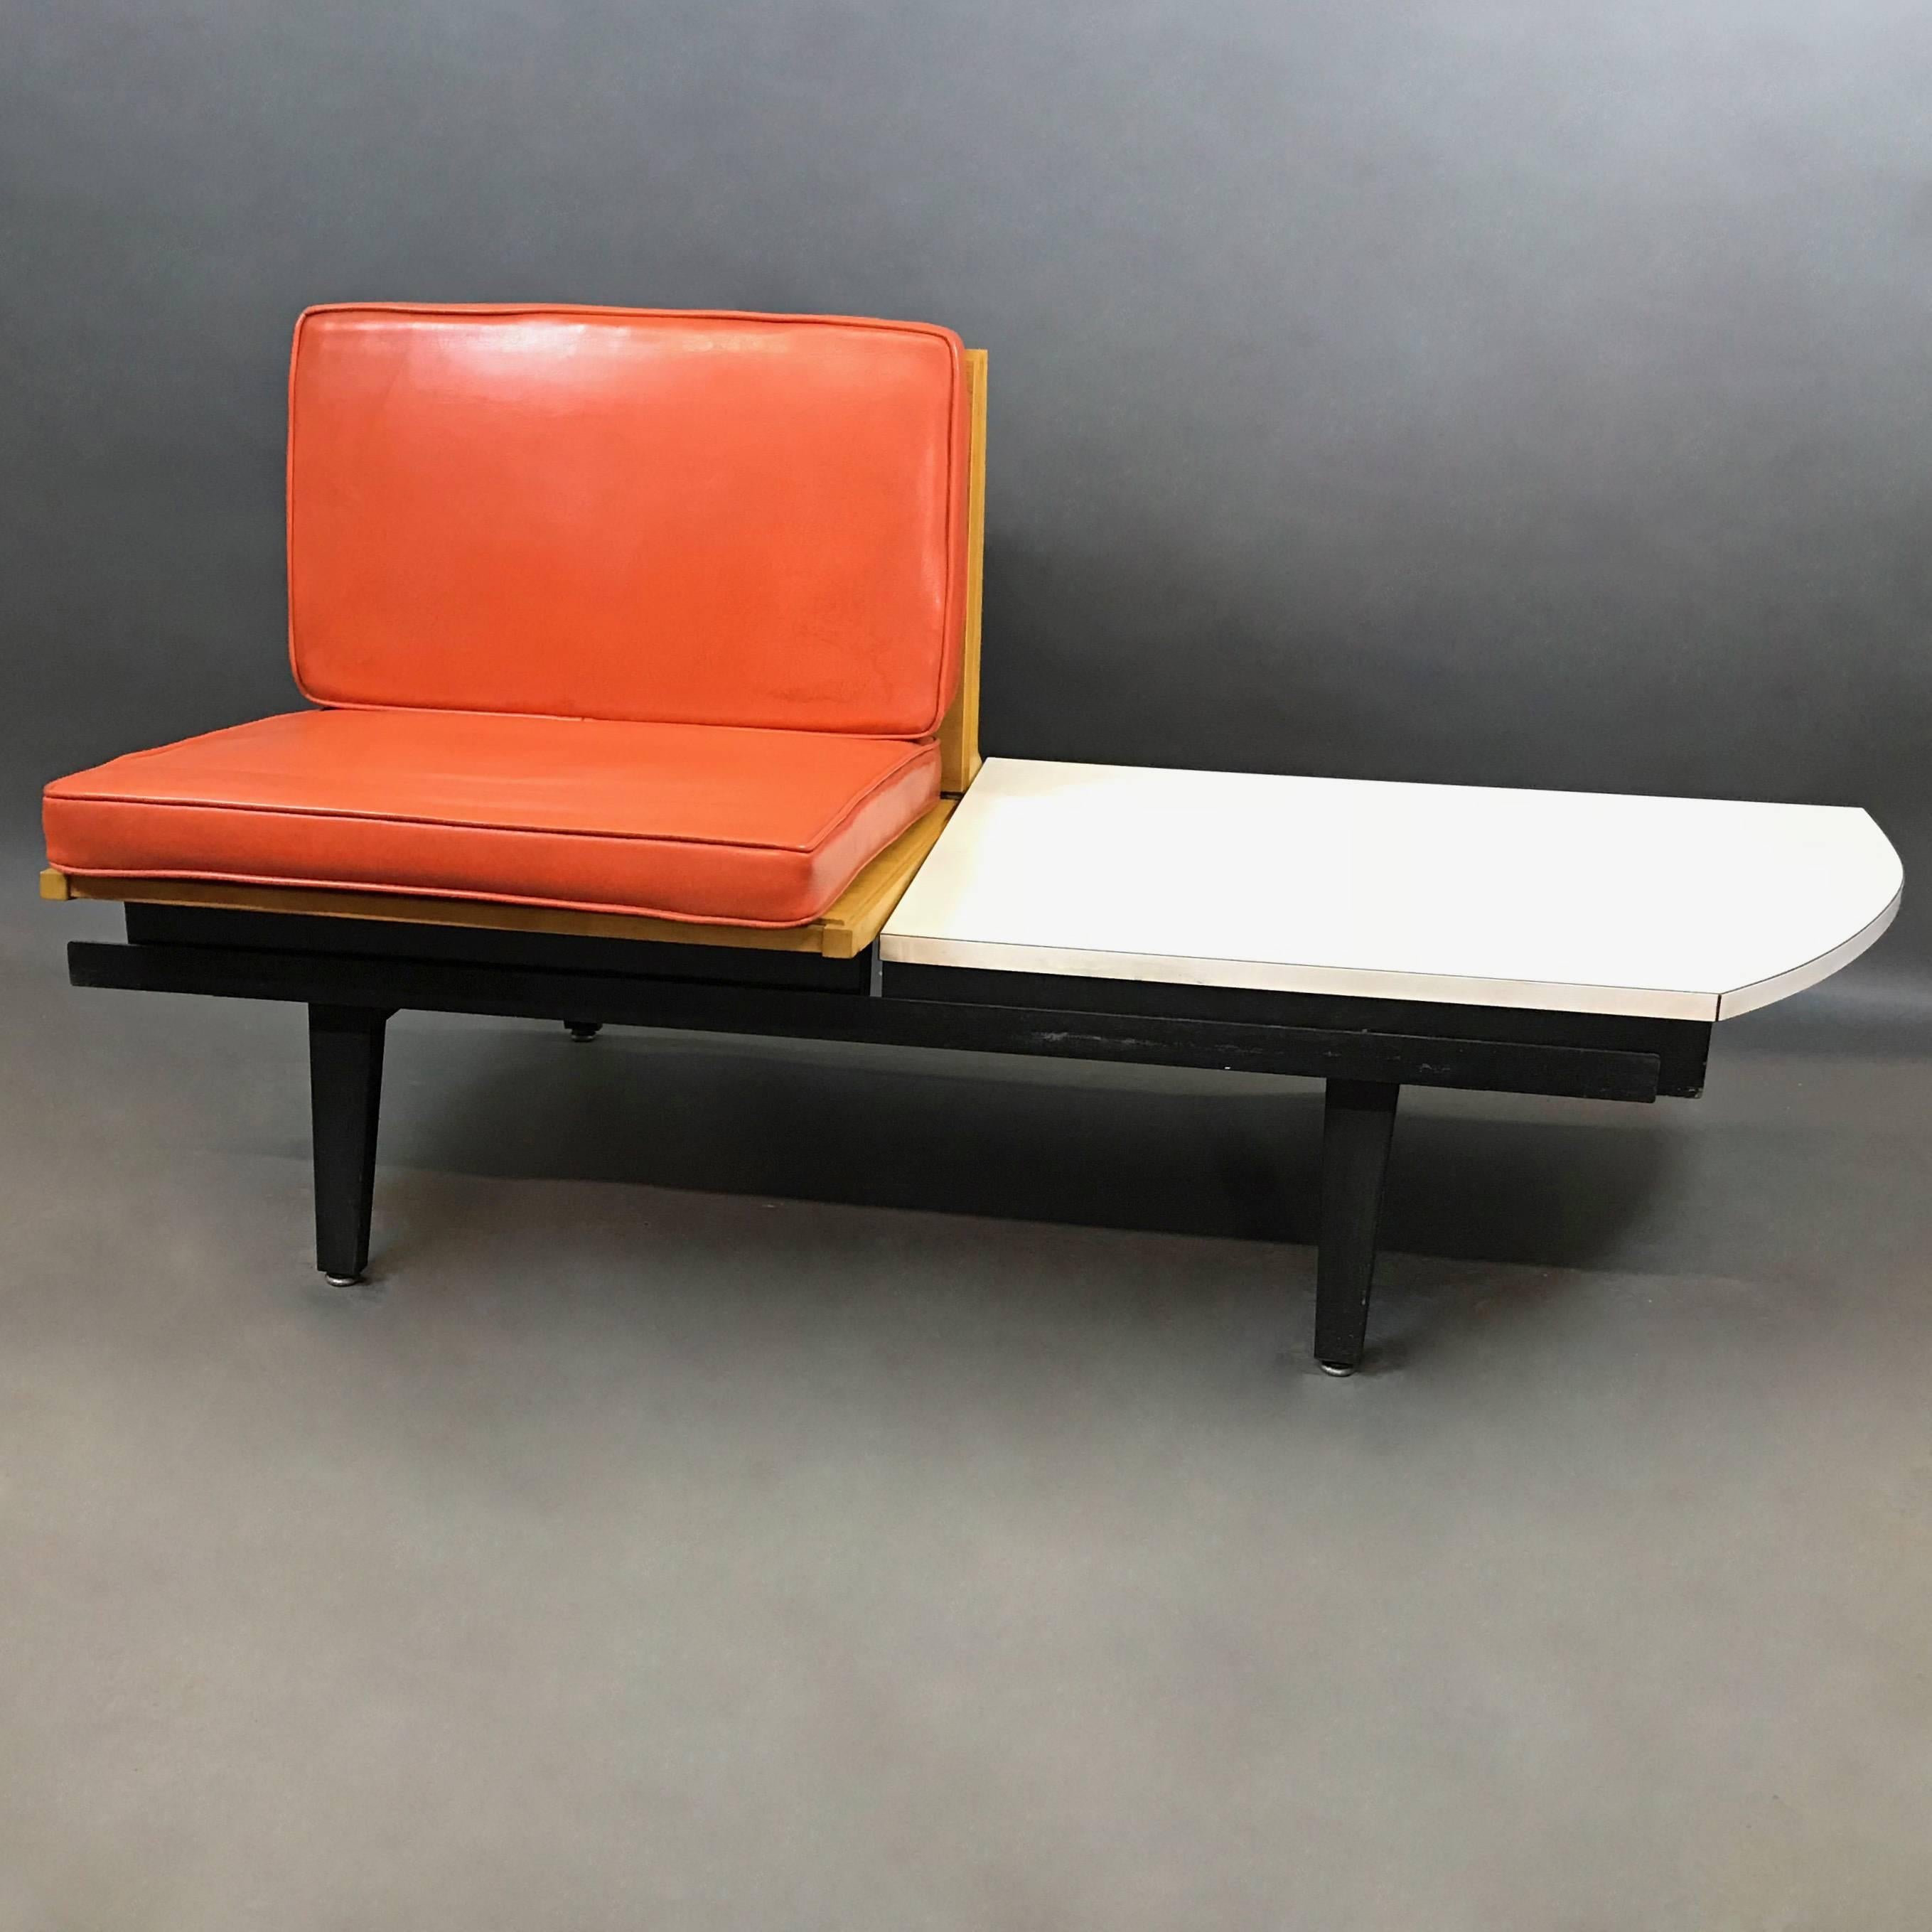 Mid-Century Modern, modular, sofa, bench seating by George Nelson for Herman Miller, steel frame collection features original, removable orange vinyl cushions on an ash seat and back with an integrated white Formica side table with rounded edge.